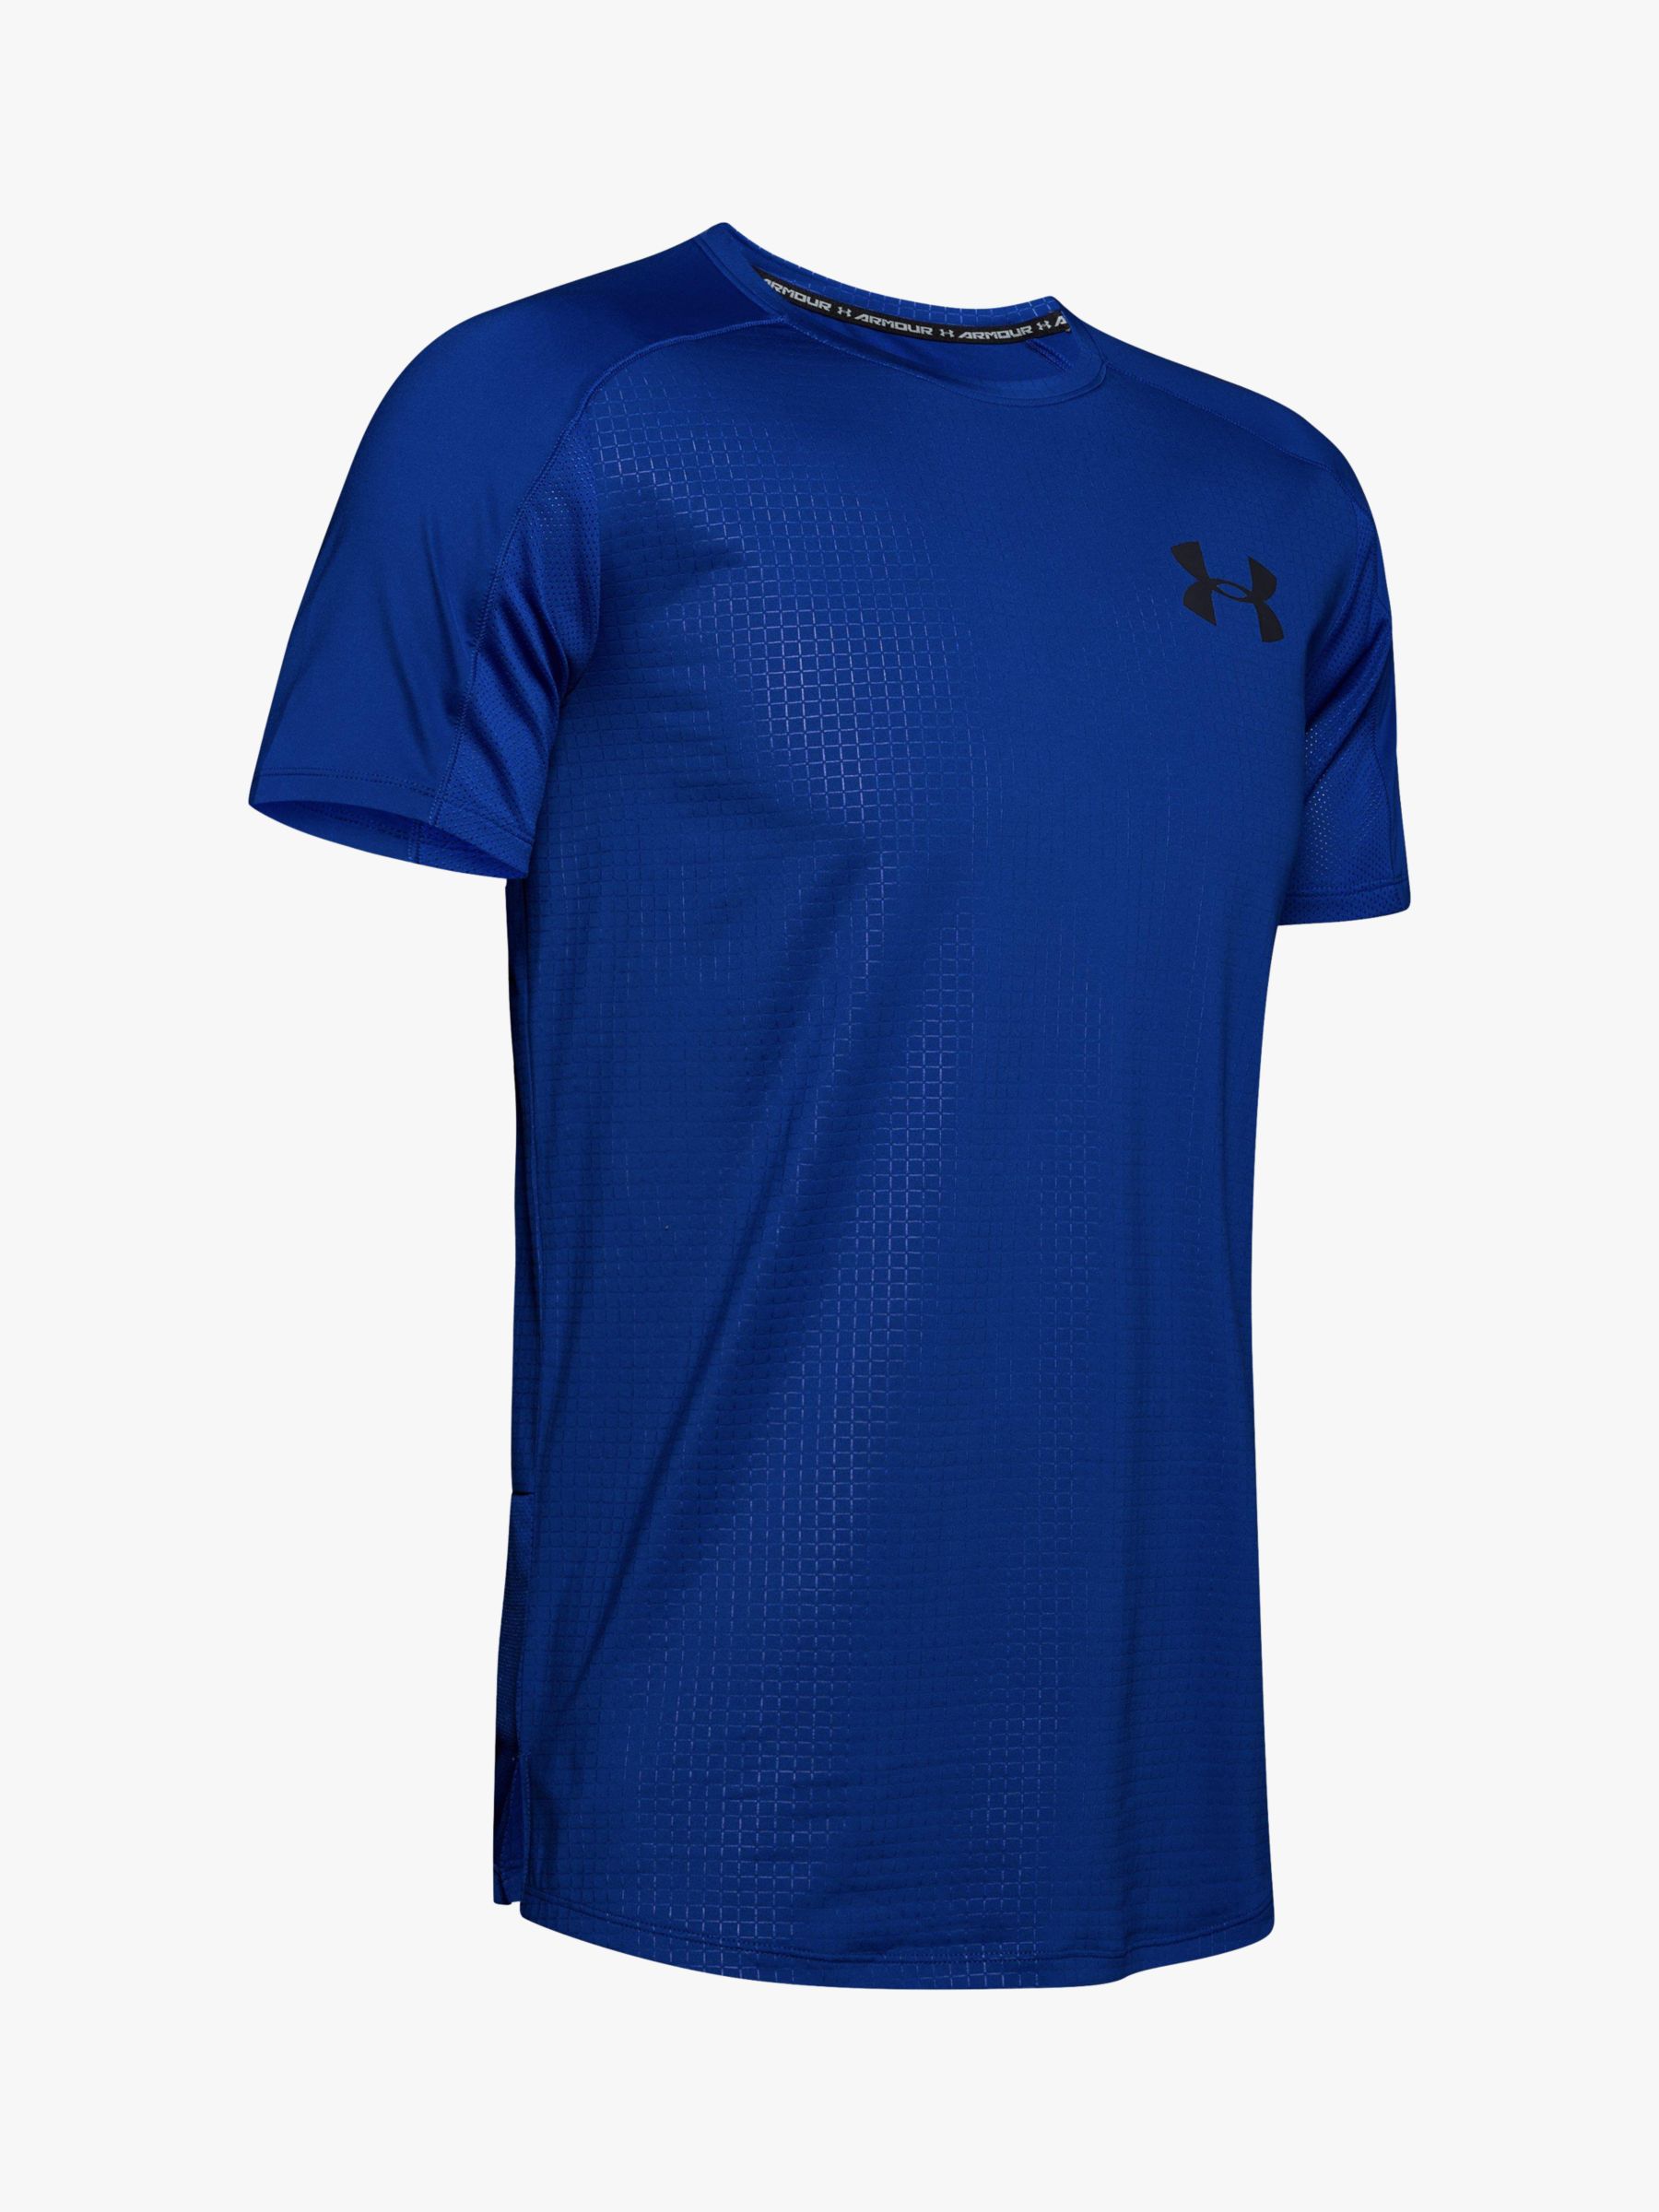 Under Armour MK-1 Short Sleeve Embossed Training Top, Royal/Academy, M